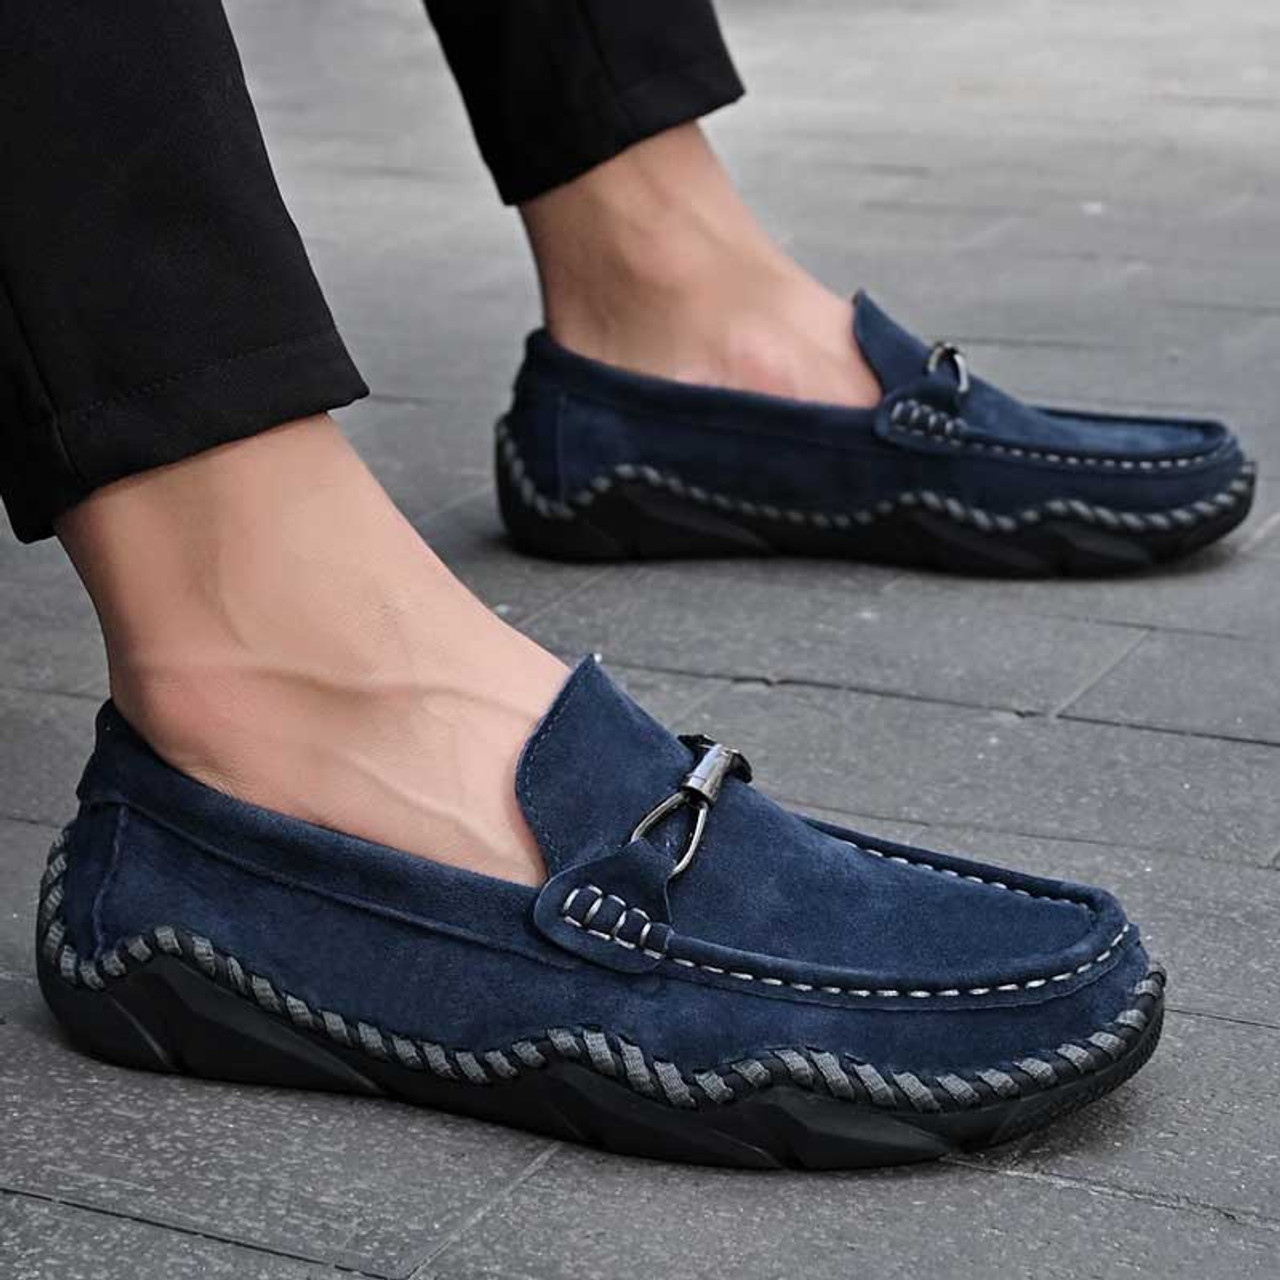 Blue sewing accents metal buckle slip on shoe loafer | Mens shoe ...